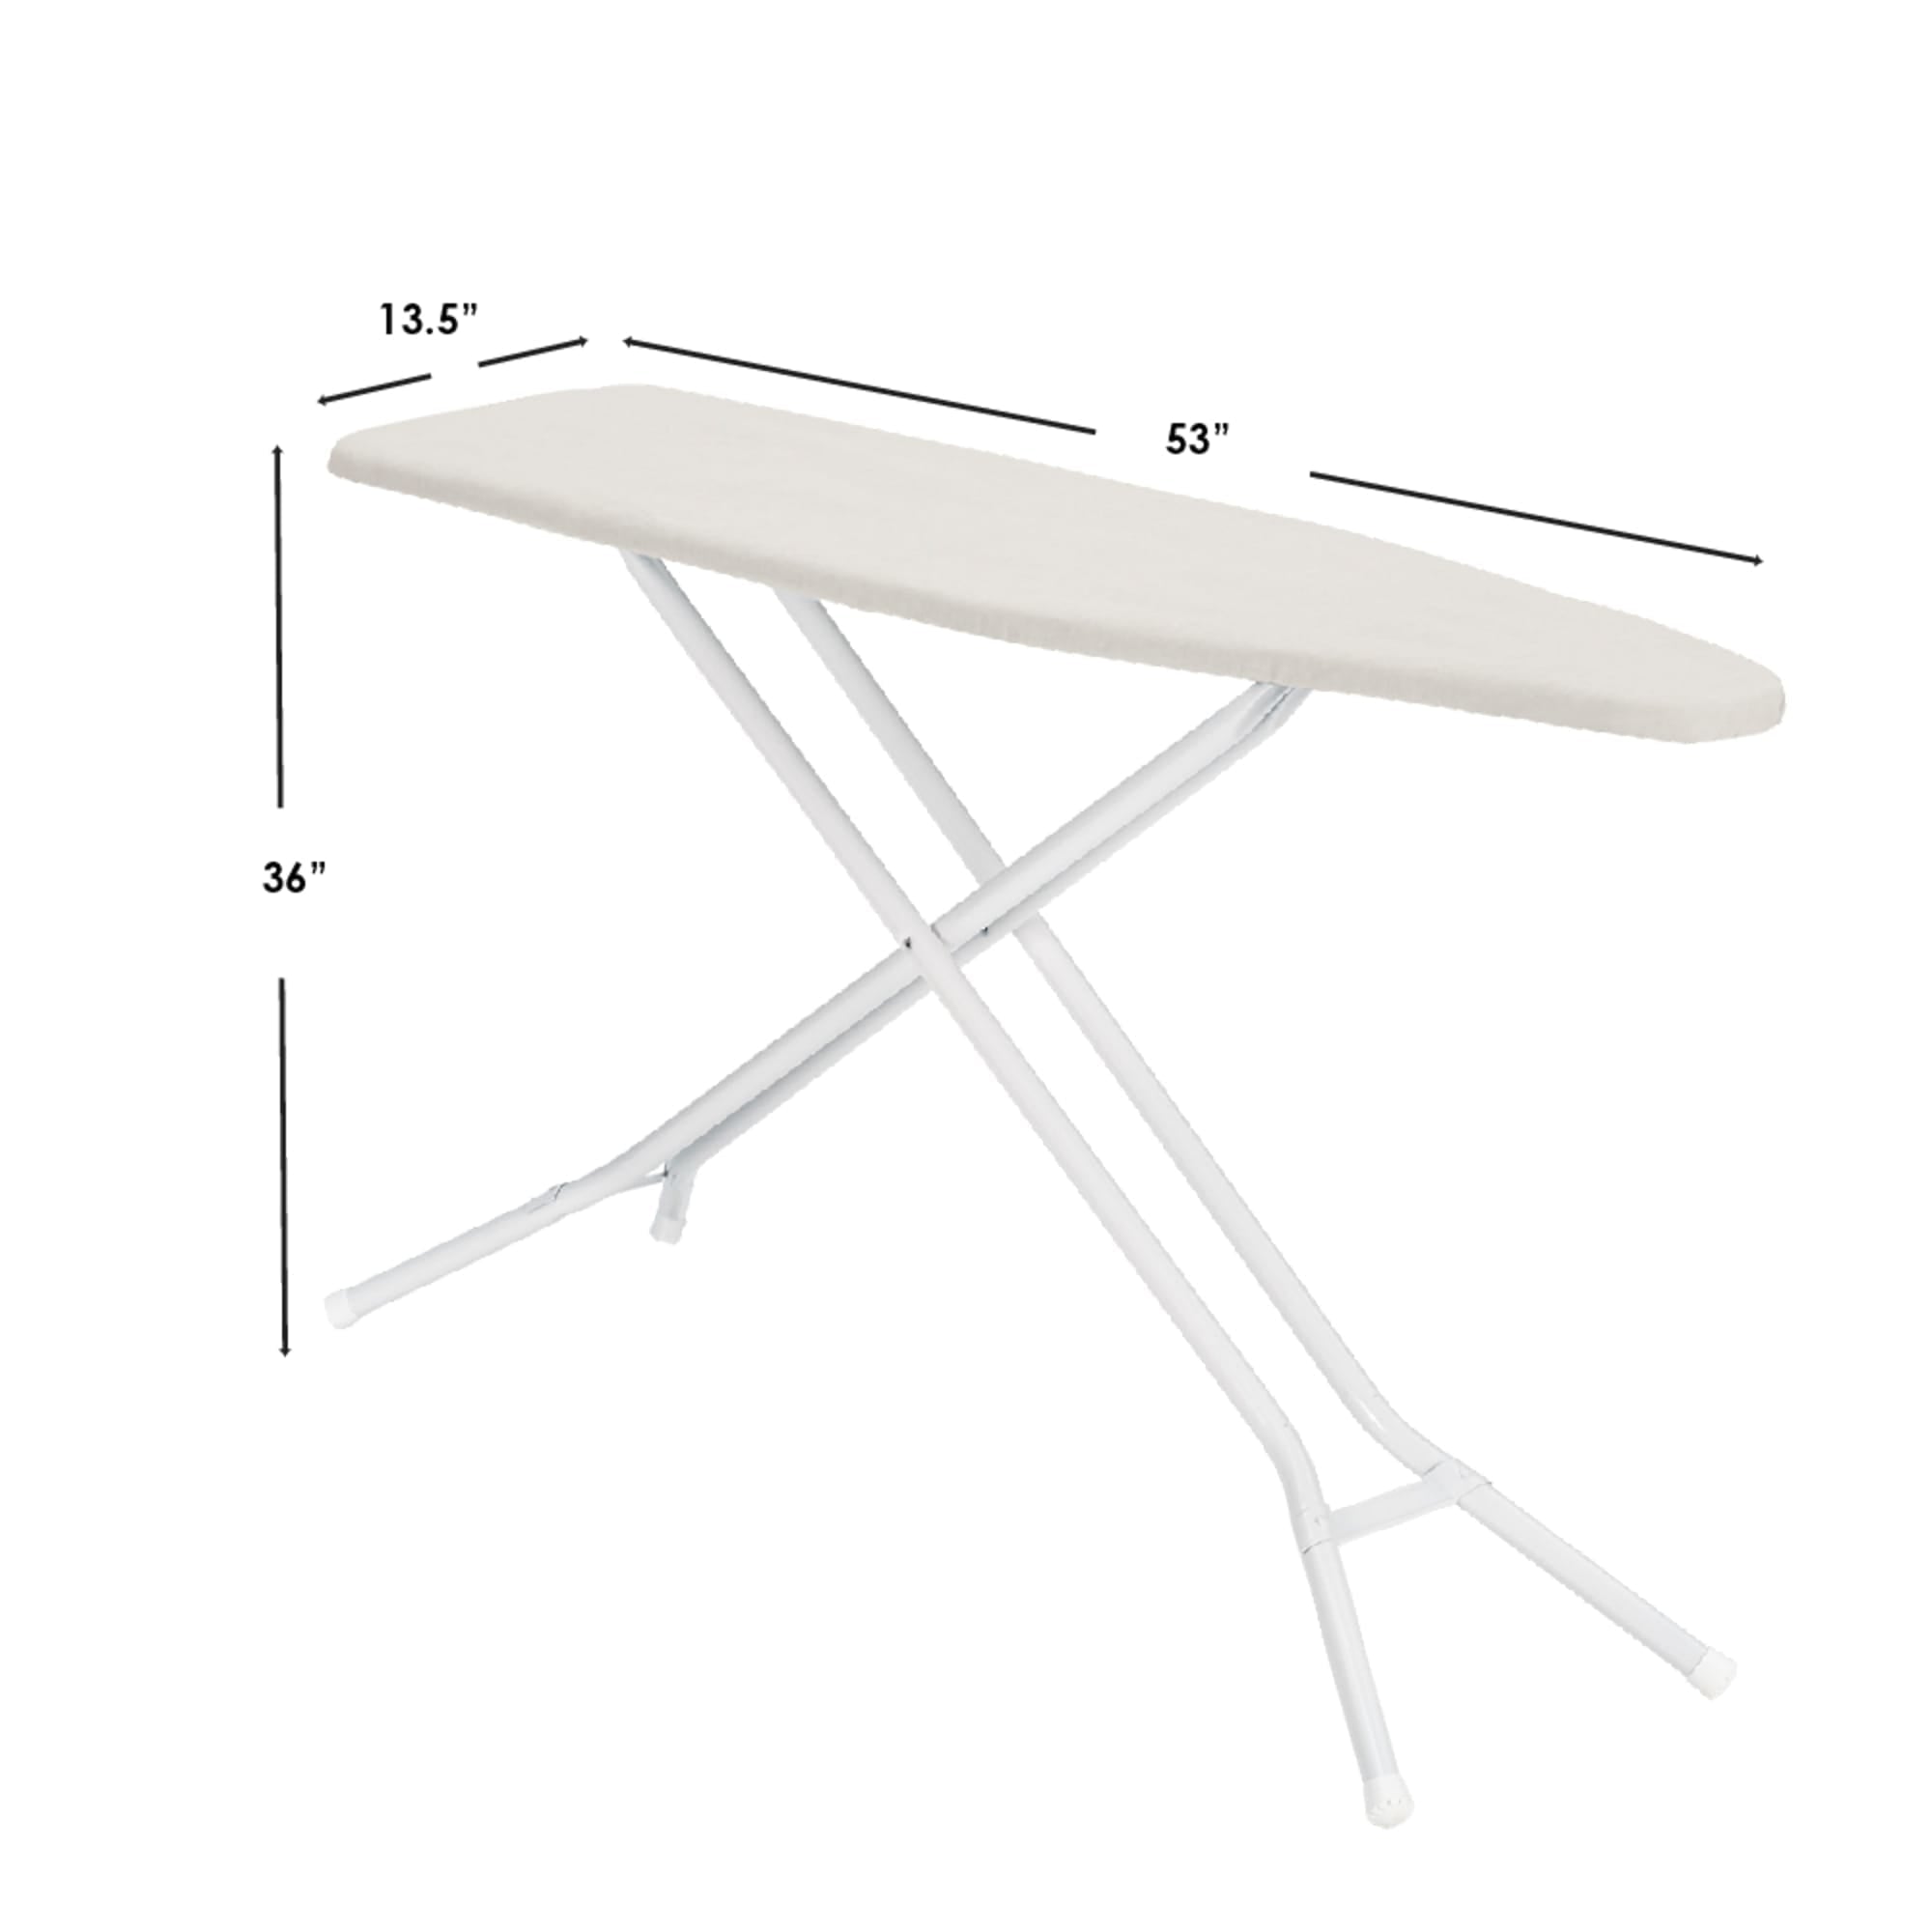 How to Make the Ironing Board of Your Dreams!